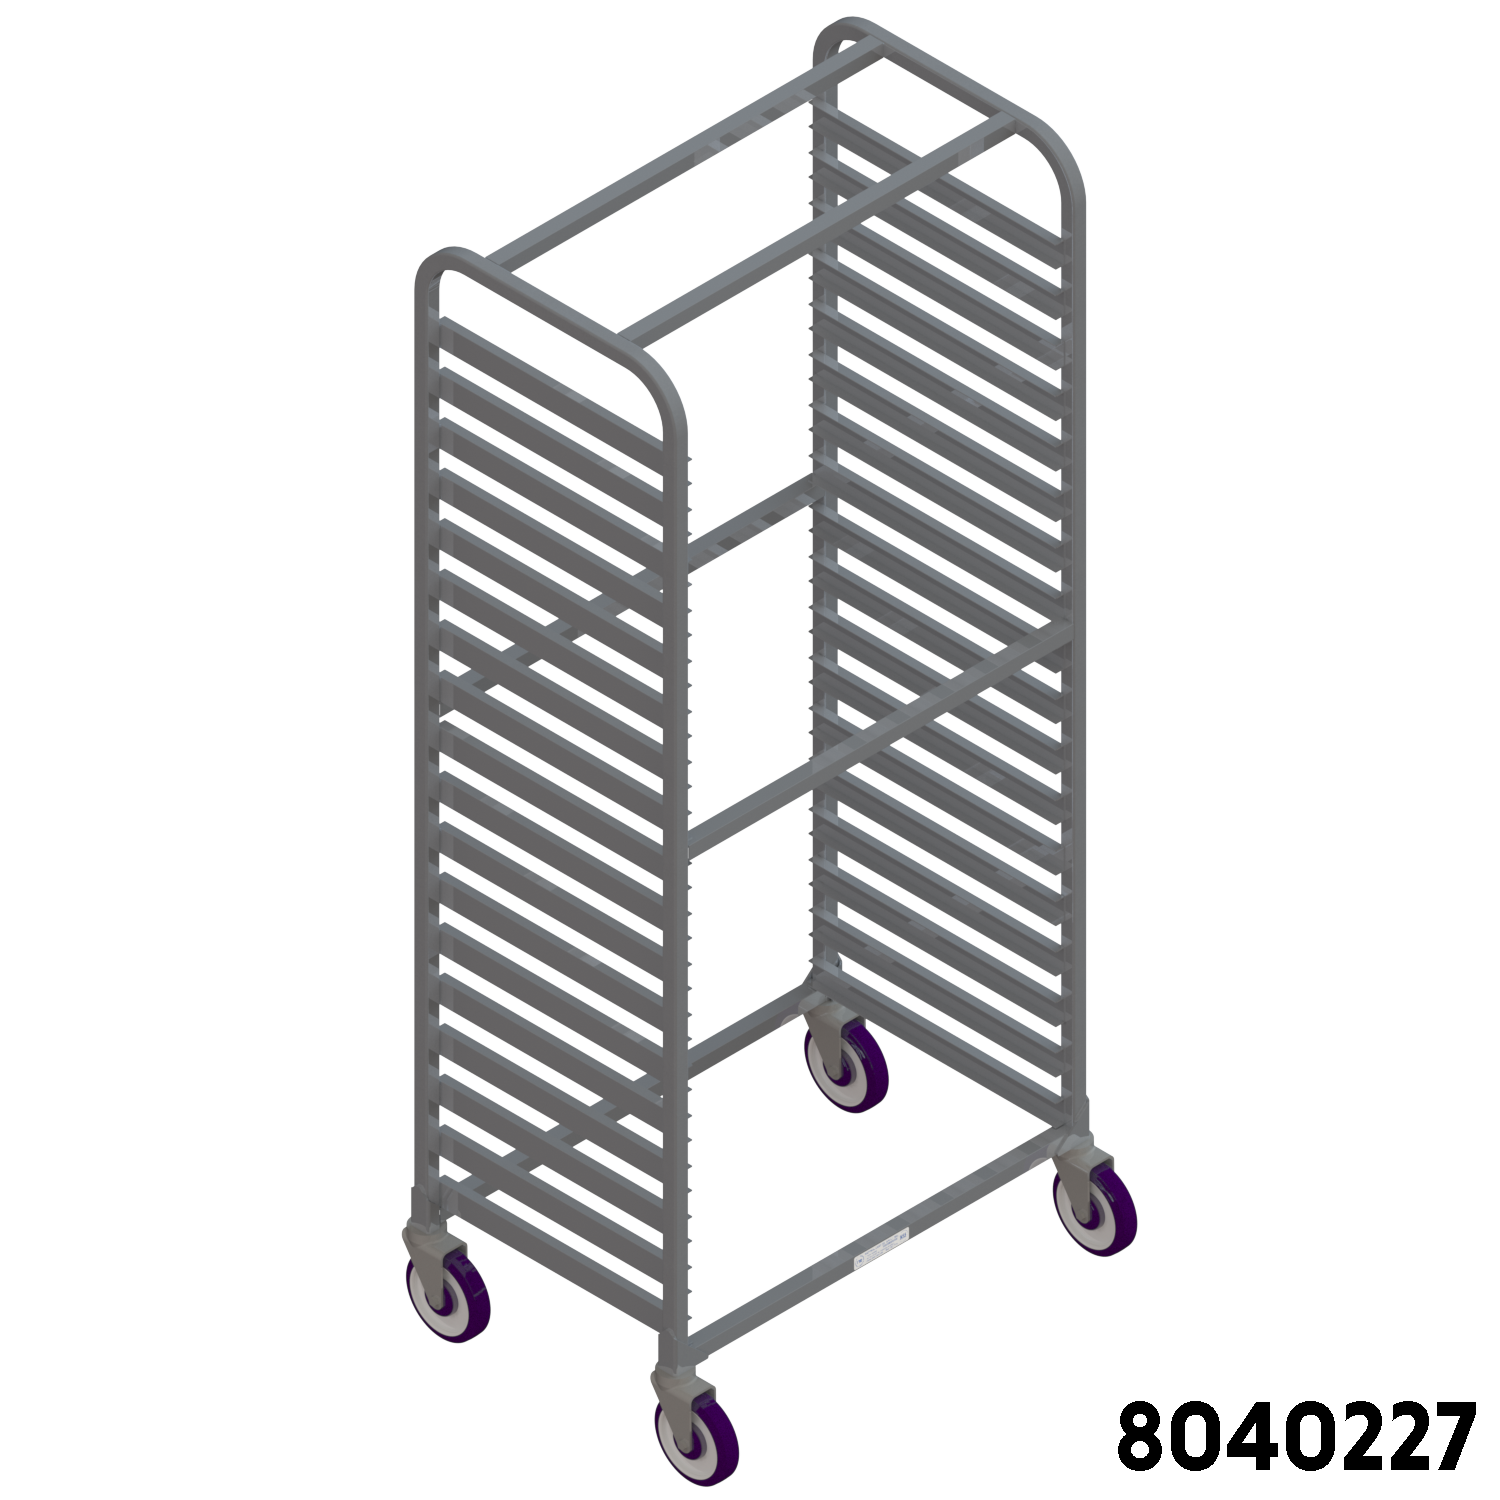 Effortless Mobility: Experience easy movement with radius corners that provide comfort when pushing the cart. The inclusion of four swivel casters with polyurethane wheels enhances mobility, making it a breeze to maneuver.